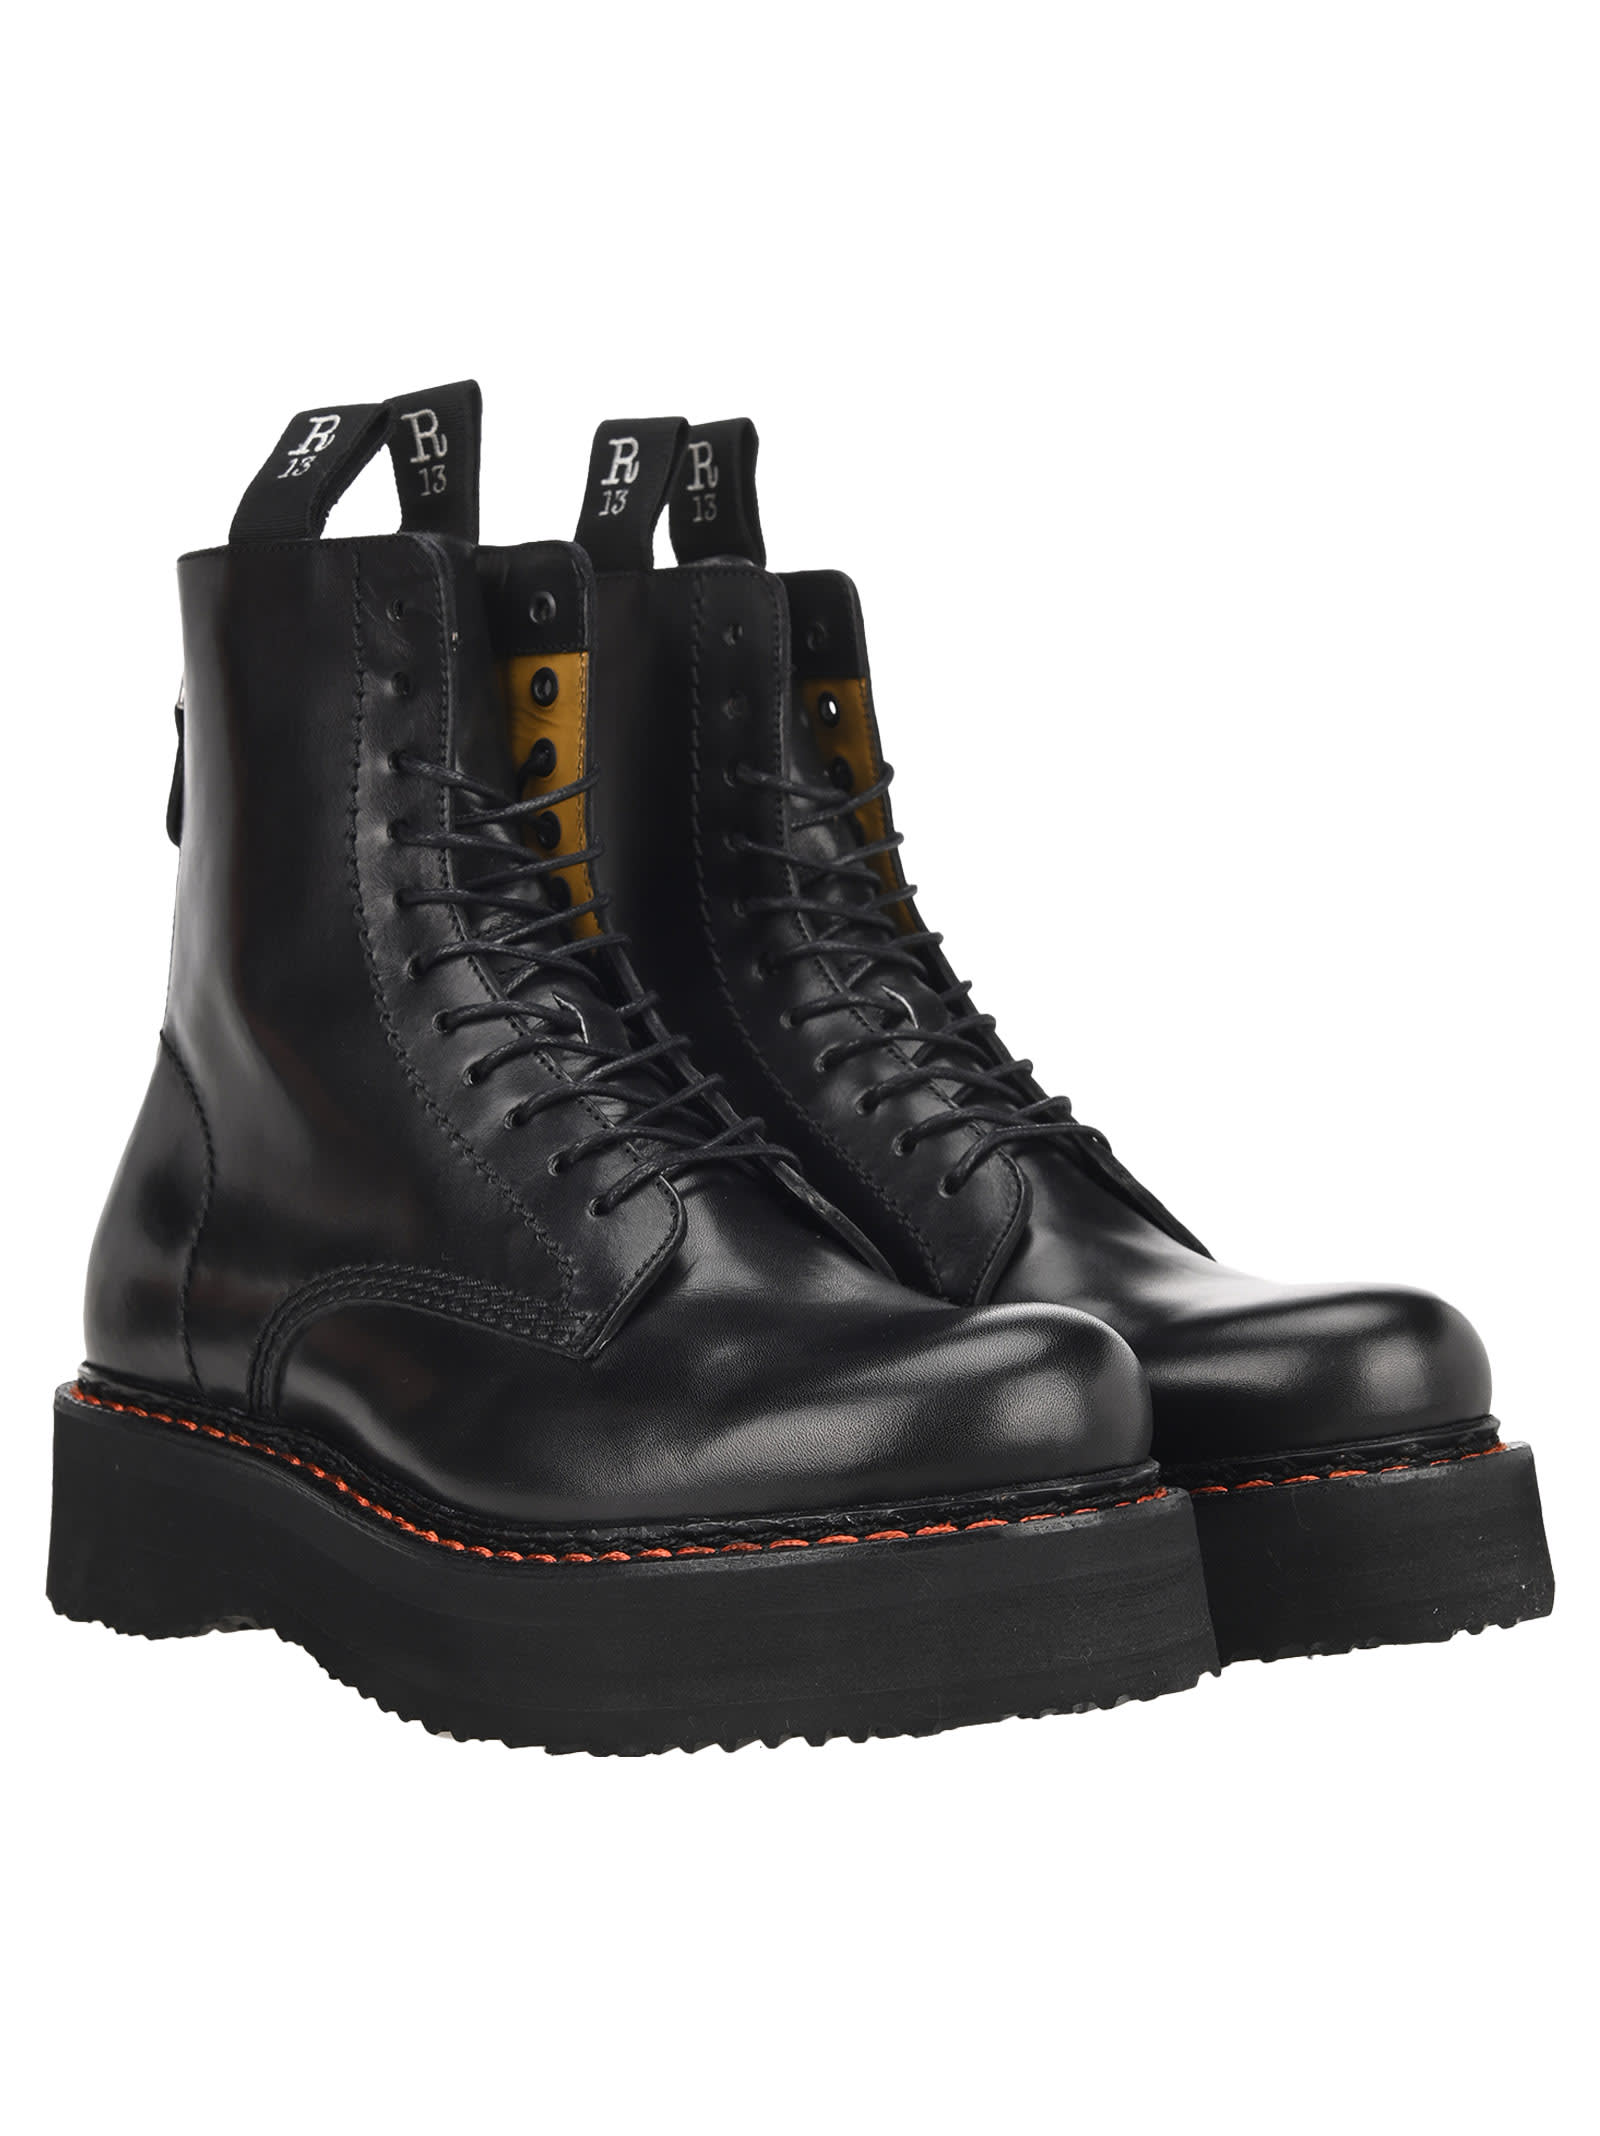 R13 Boots | italist, ALWAYS LIKE A SALE